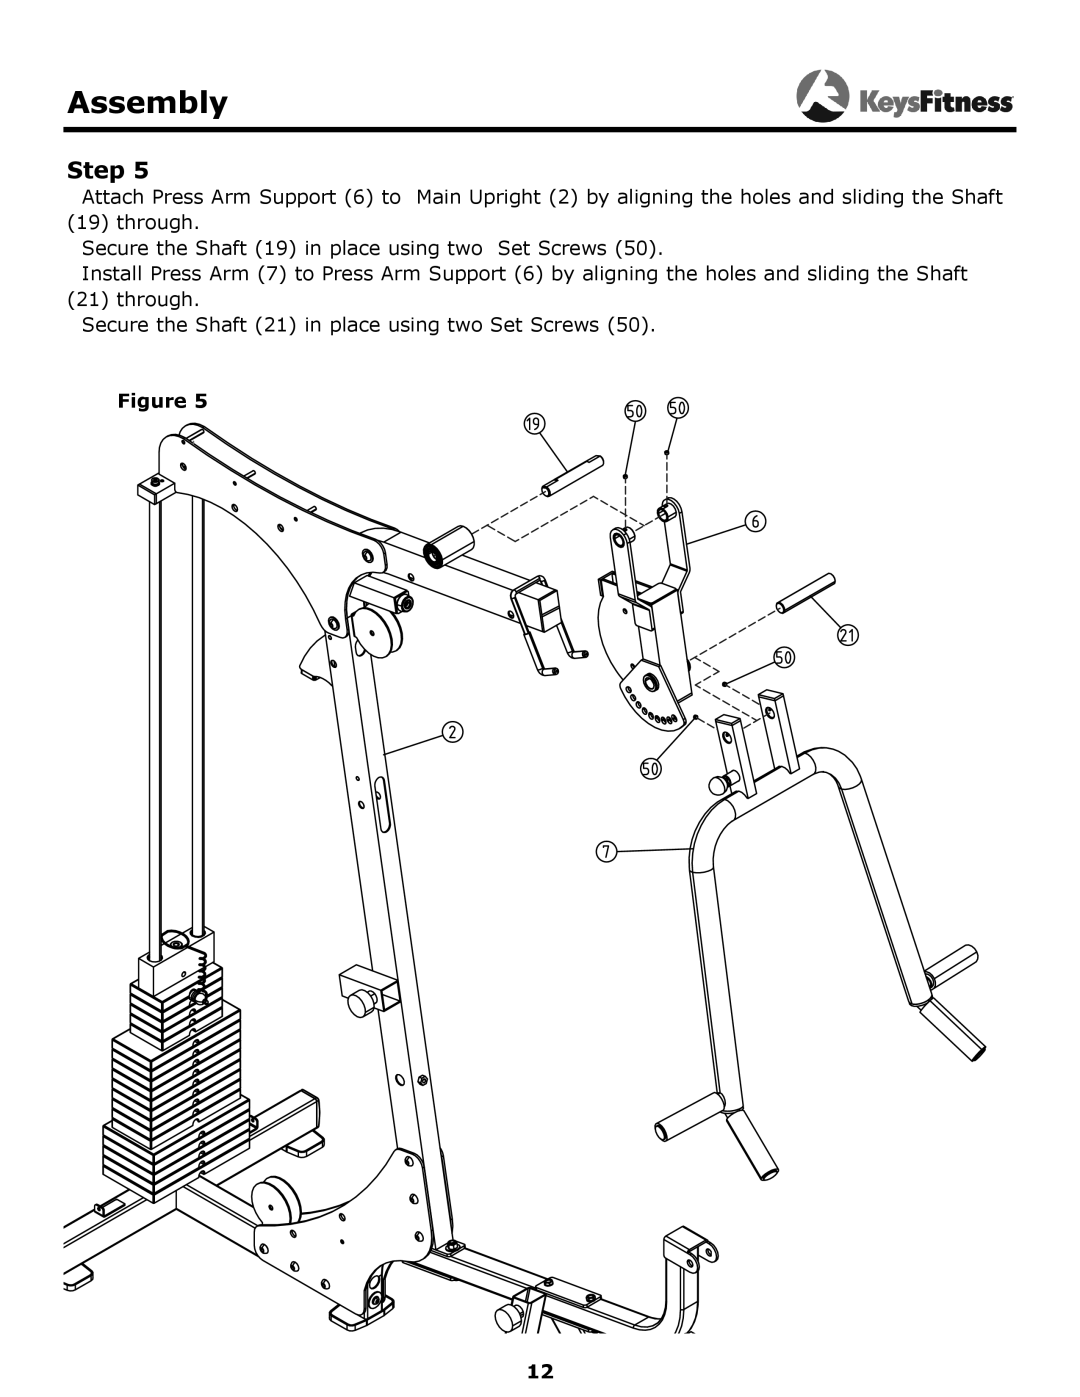 Keys Fitness KF-1560 owner manual Assembly, Step, Secure the Shaft 19 in place using two Set Screws 